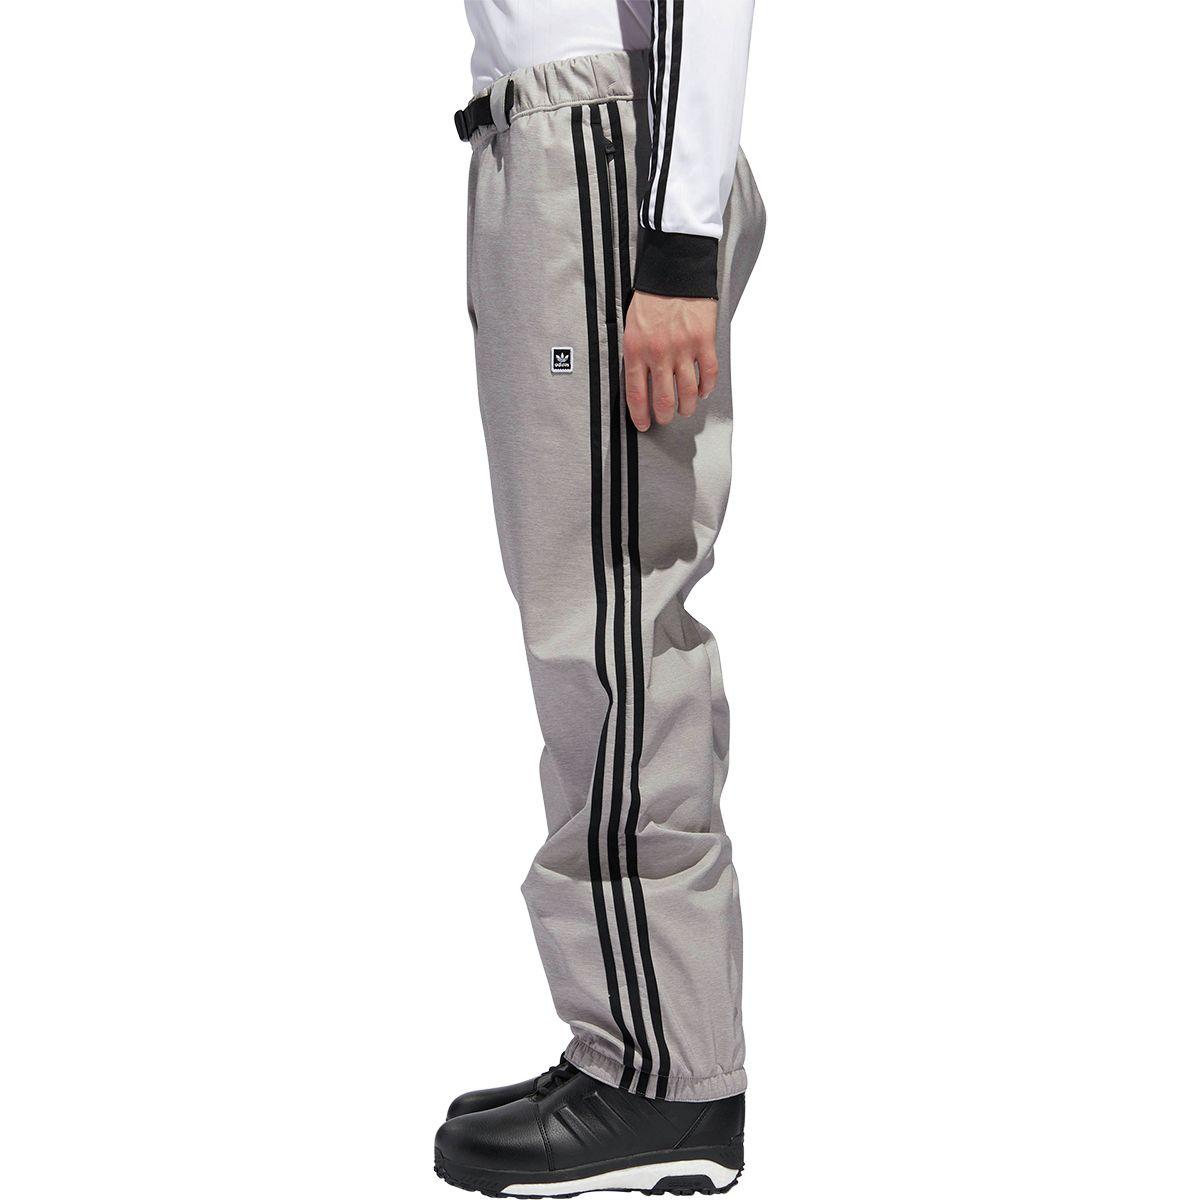 adidas Synthetic Lazy Man Pant in Gray for Men - Lyst